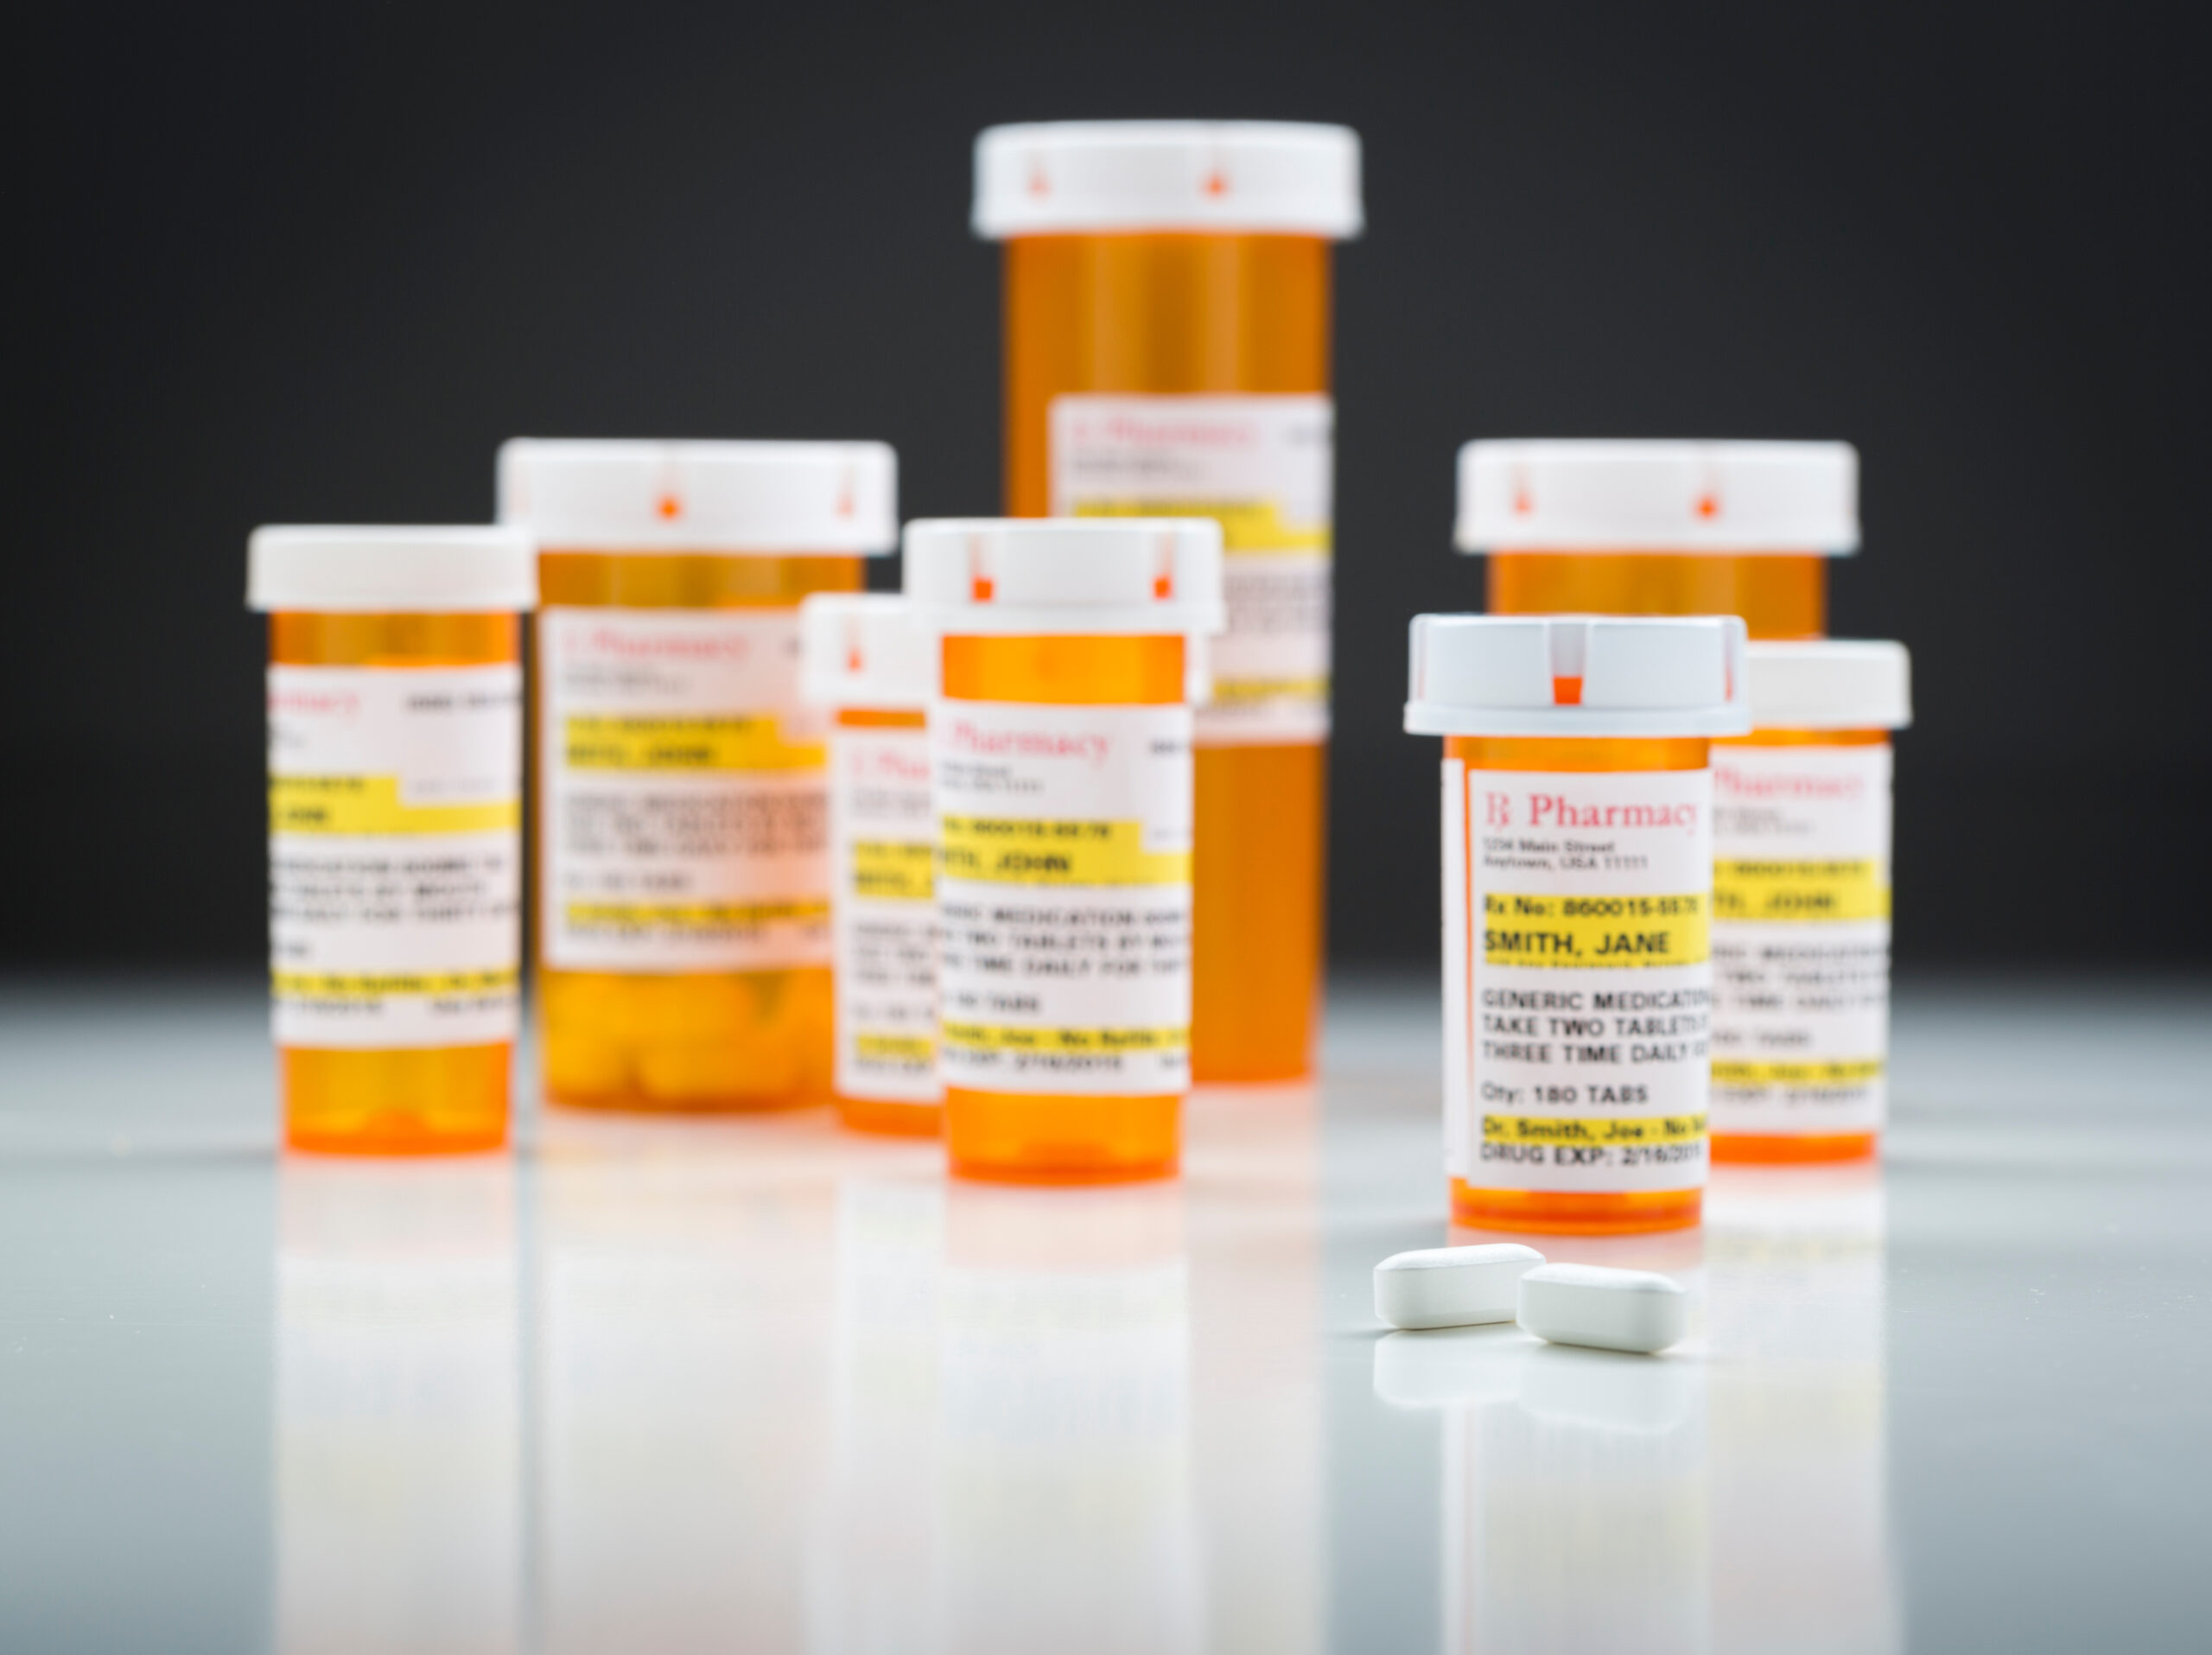 Variety of Non-Proprietary Medicine Bottles and Large Pills on Reflective Surface With Grey Background.